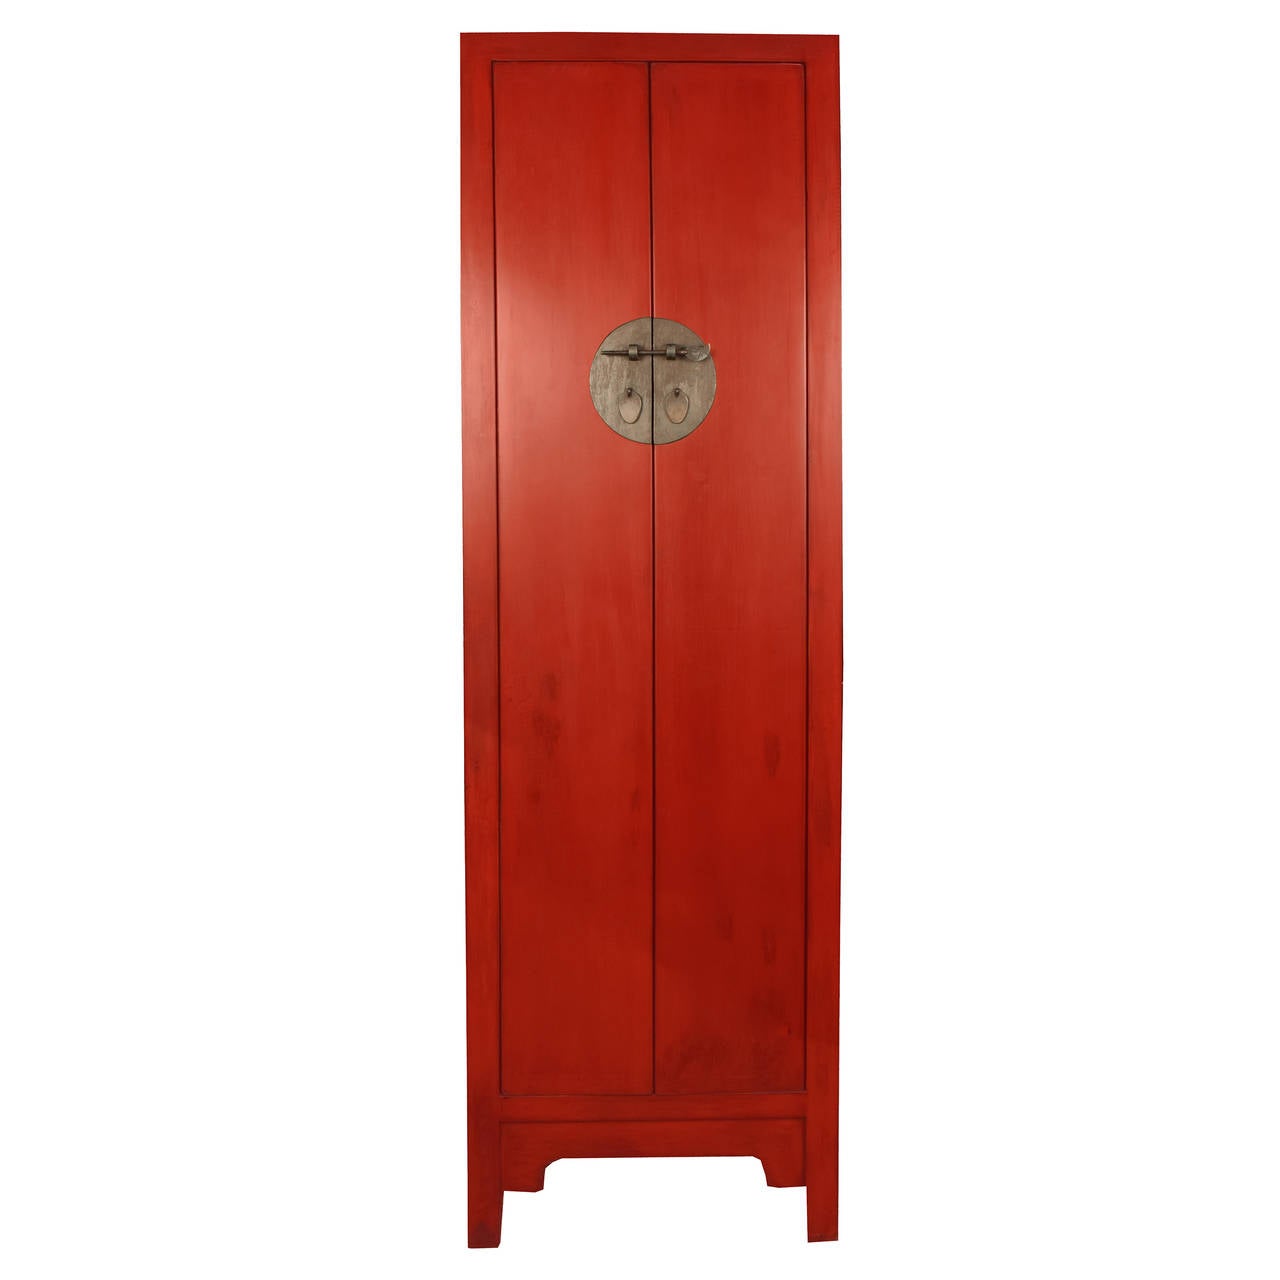 A pair of c. 1900 narrow red lacquer two door cabinets from Hebei Province, China with three interiors shelves and brass hardware.

Pagoda Red Collection # BJDD027